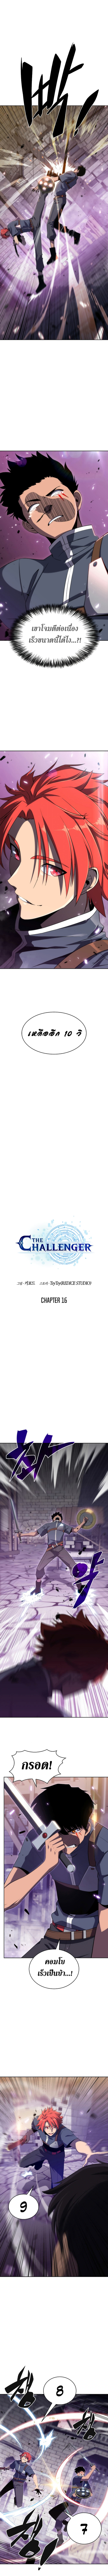 The Challenger 16 (2)